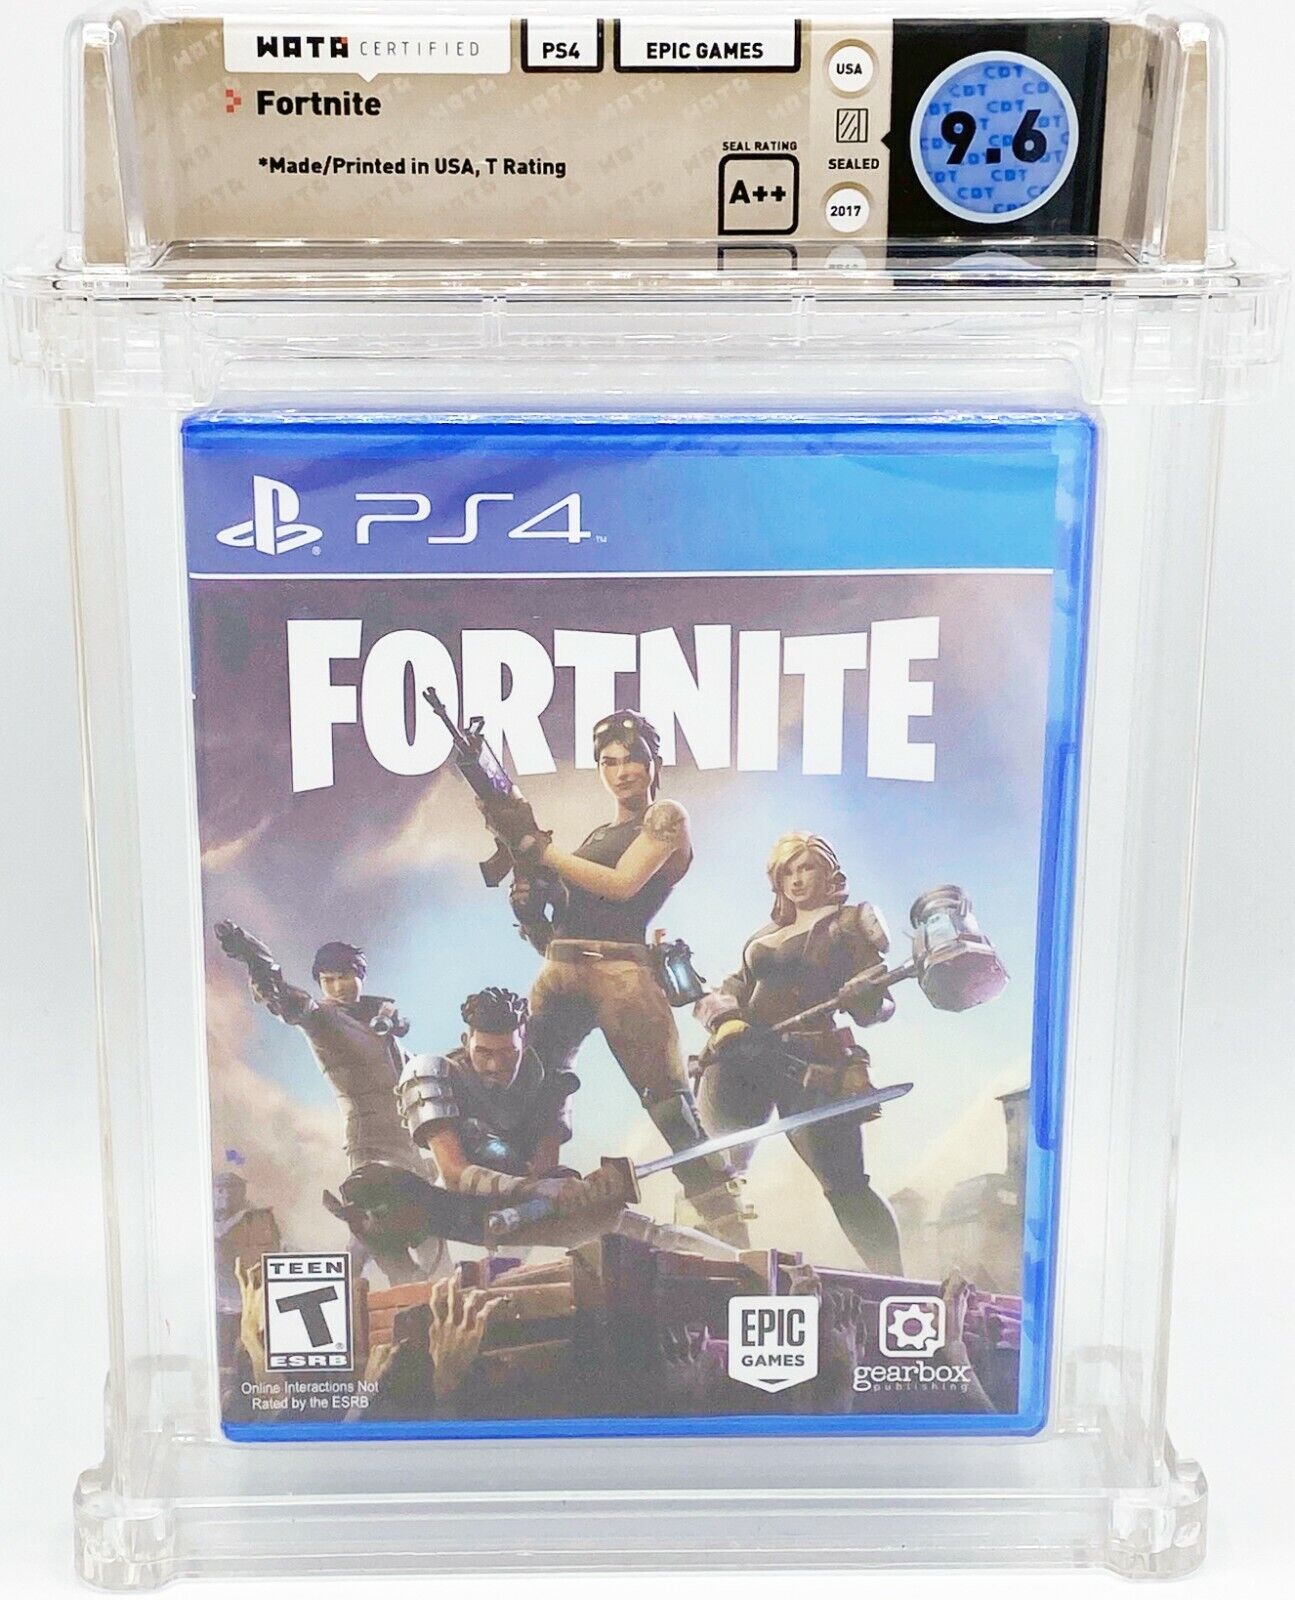 PS4 - FORTNITE - FACTORY SEALED - WATA 9.6 A++ - EPIC...